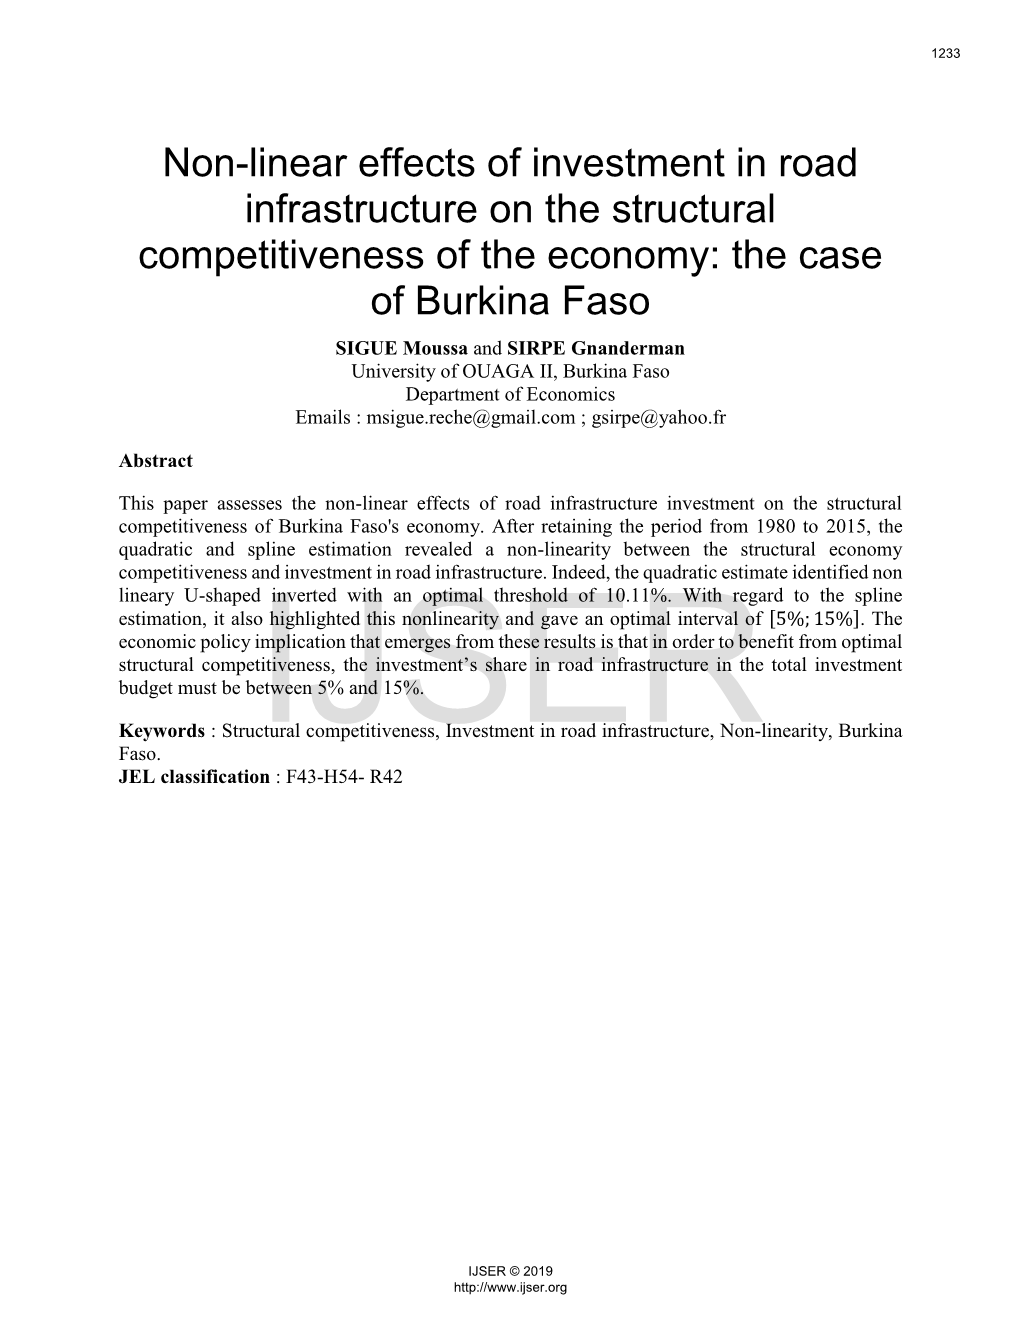 Non-Linear Effects of Investment in Road Infrastructure on the Structural